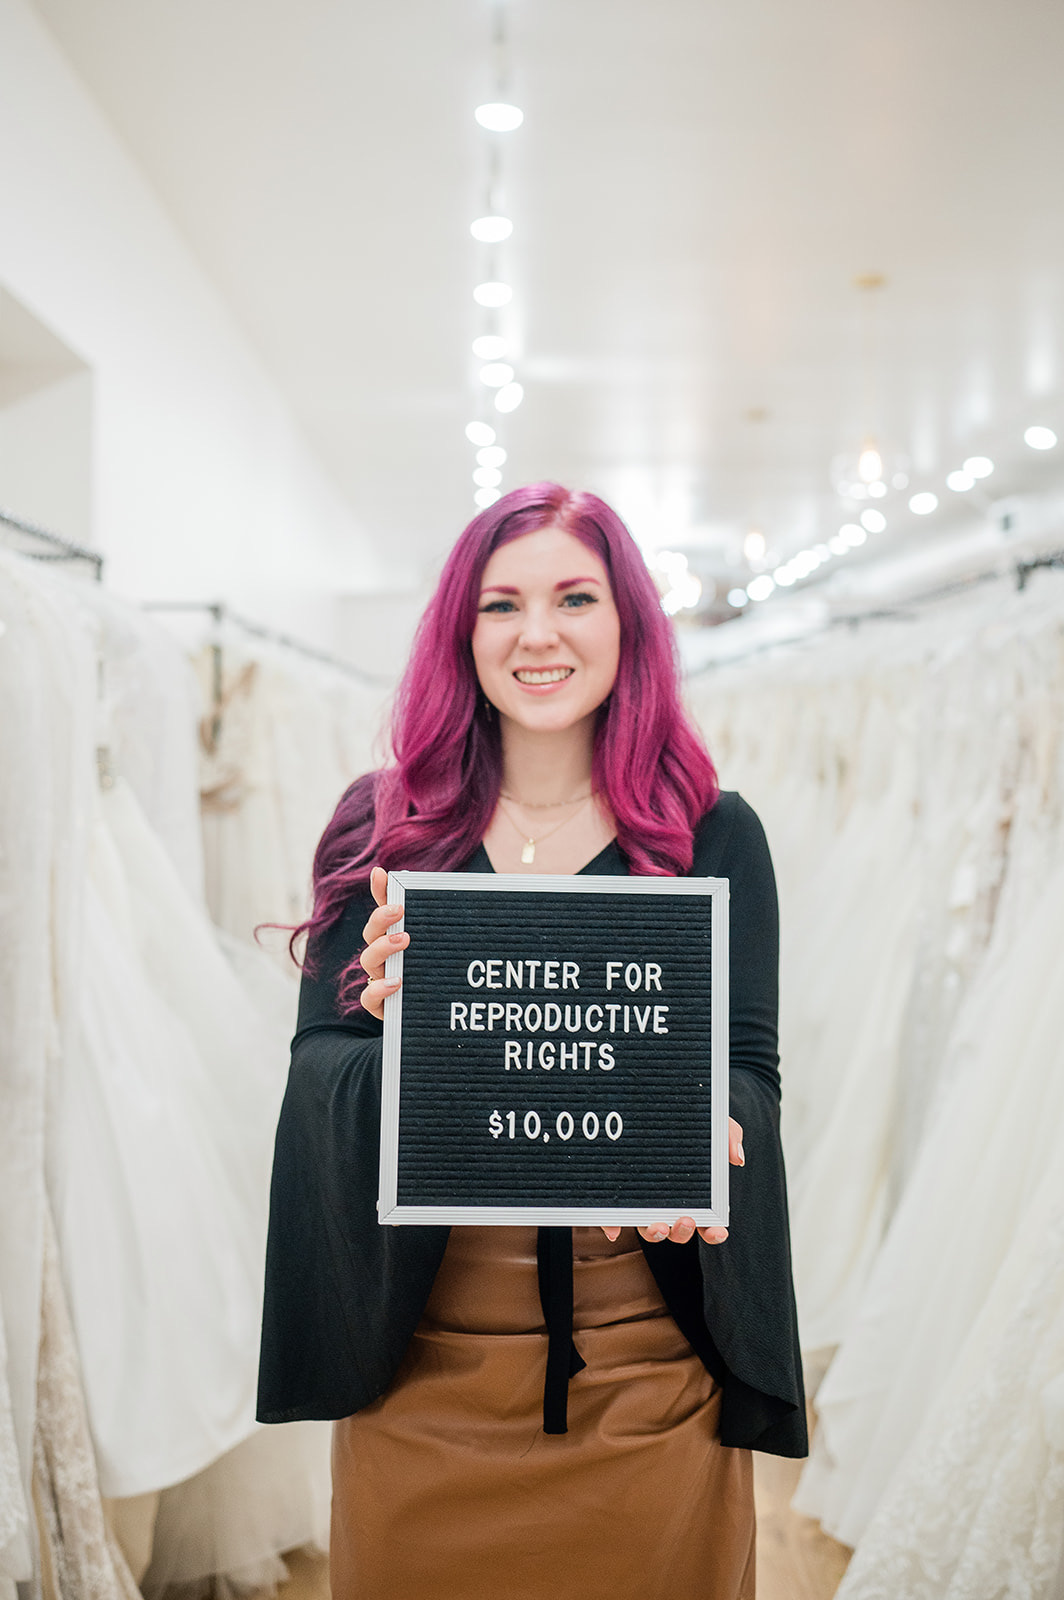 2022 Gift of $10,000 to Center for Reproductive Rights